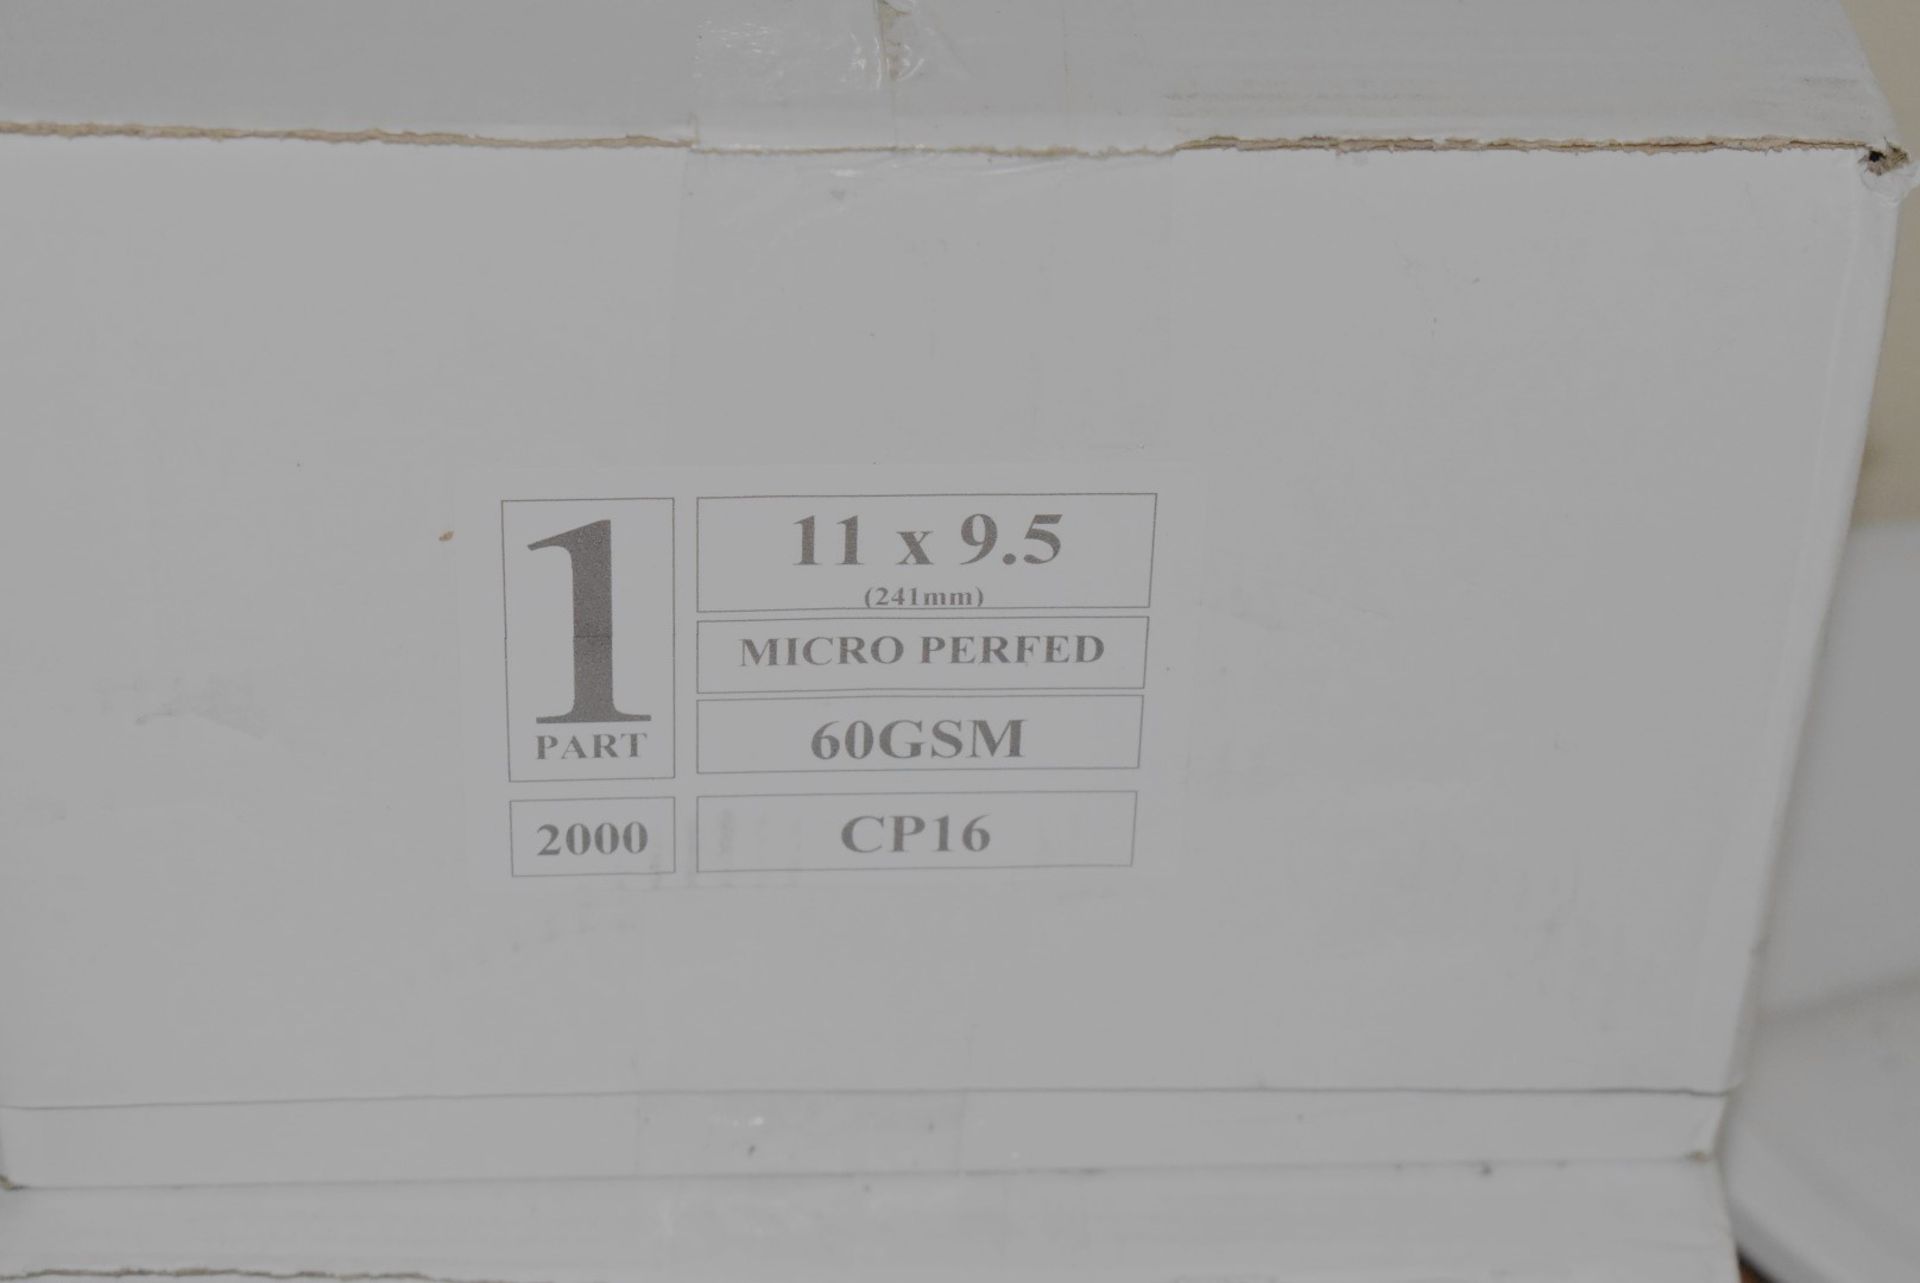 3 x Boxes of Micro Perfed 60GSM 1 Part 11 X 95 Office Printer Paper - 2000 Sheets - New and Boxed - Image 2 of 2